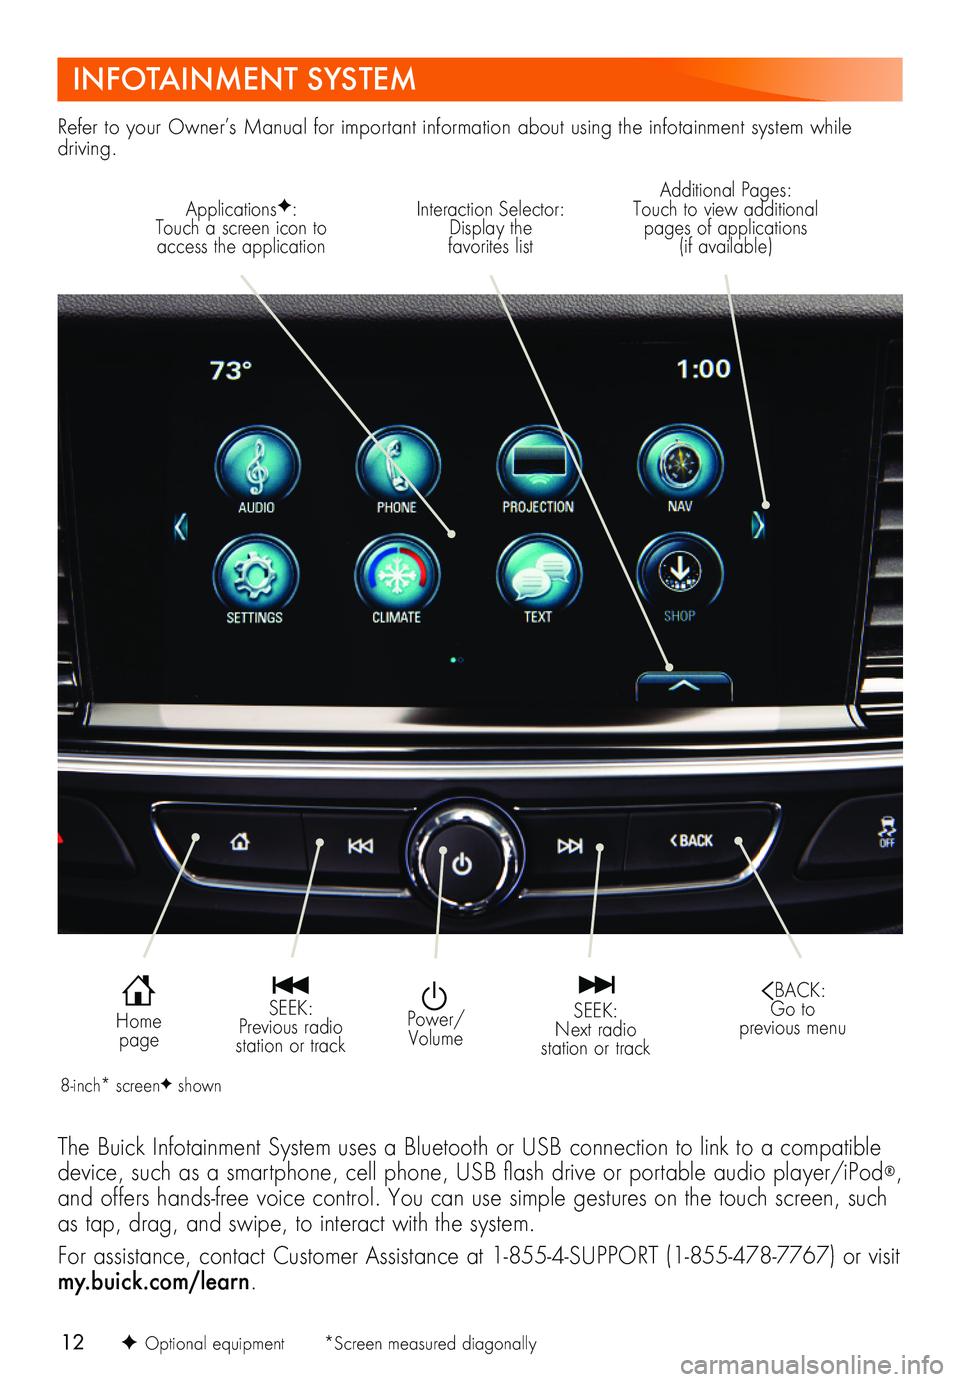 BUICK REGAL TOURX 2018  Get To Know Guide 12
INFOTAINMENT SYSTEM
ApplicationsF: Touch a screen icon to access the application
Interaction Selector: Display the  favorites list
Additional Pages: Touch to view additional pages of applications  